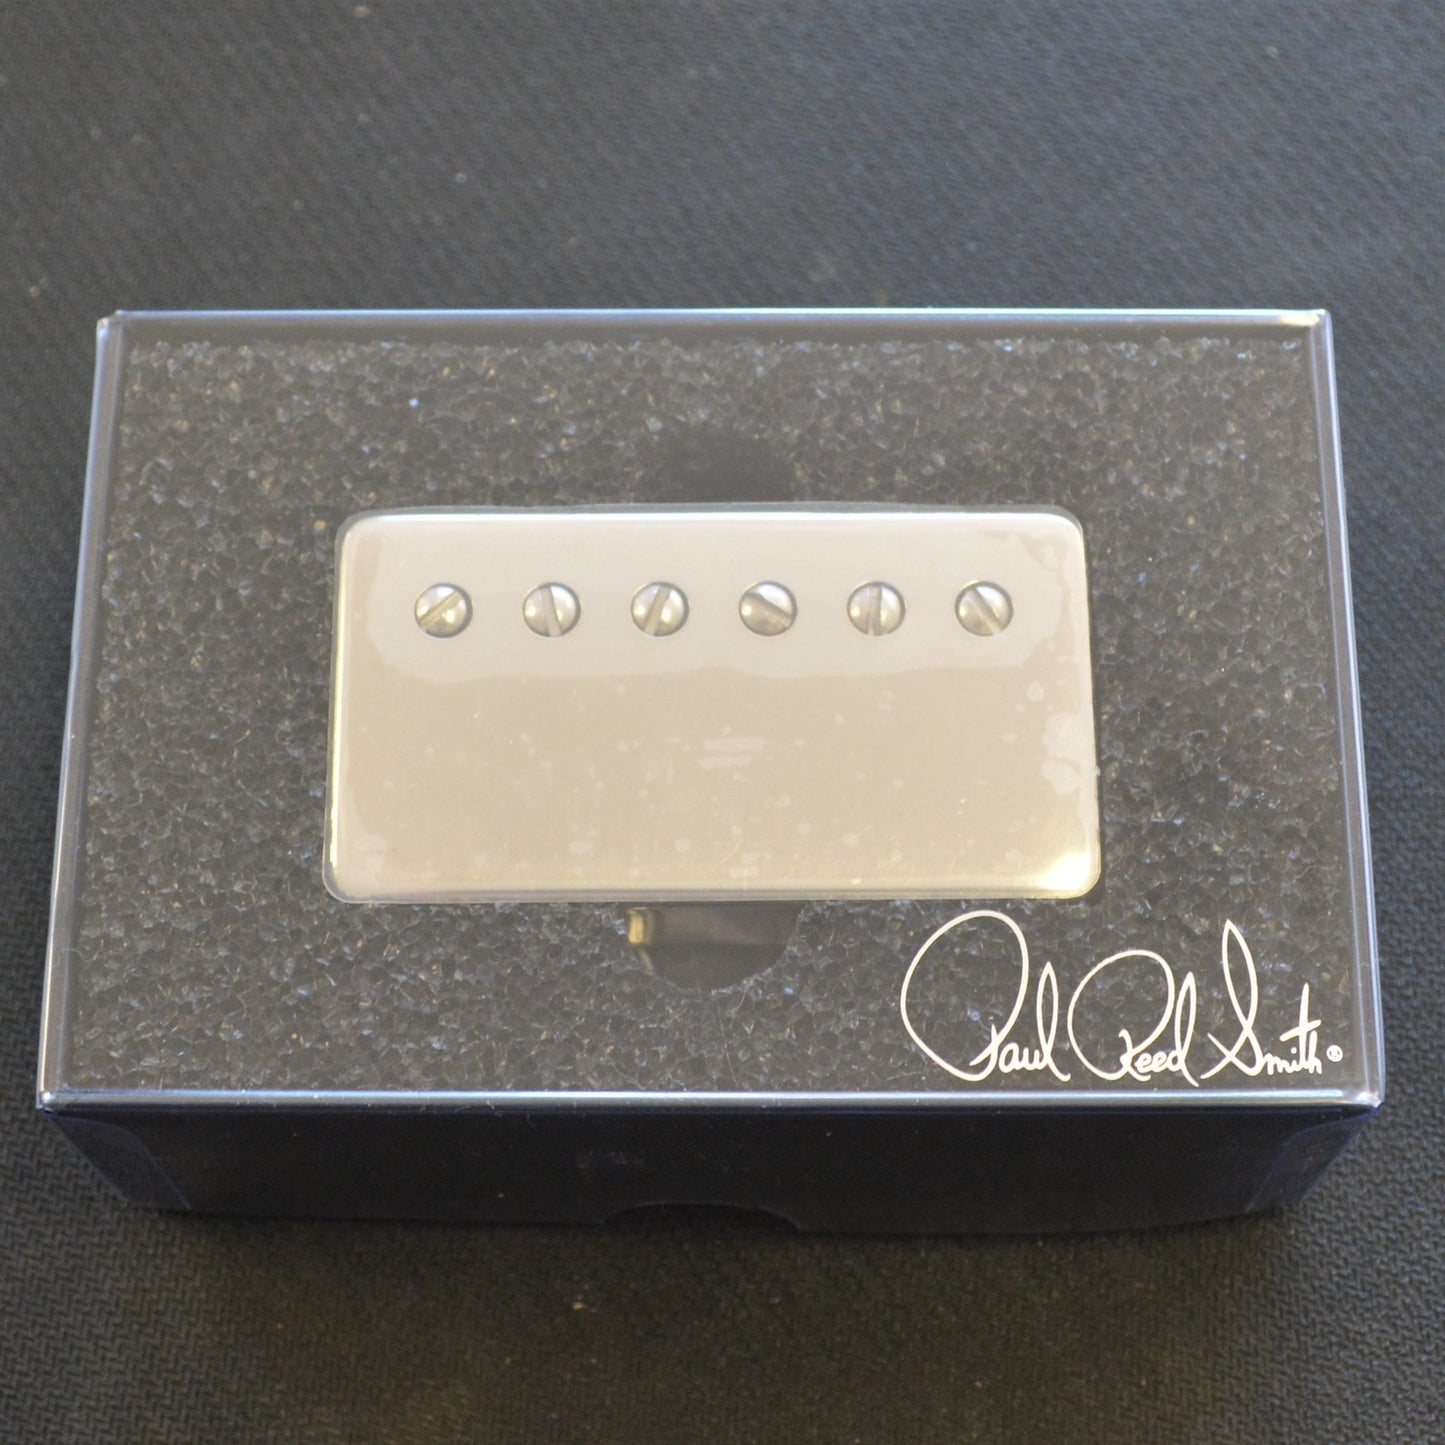 Paul Reed Smith Tremonti Bass Pickup covered